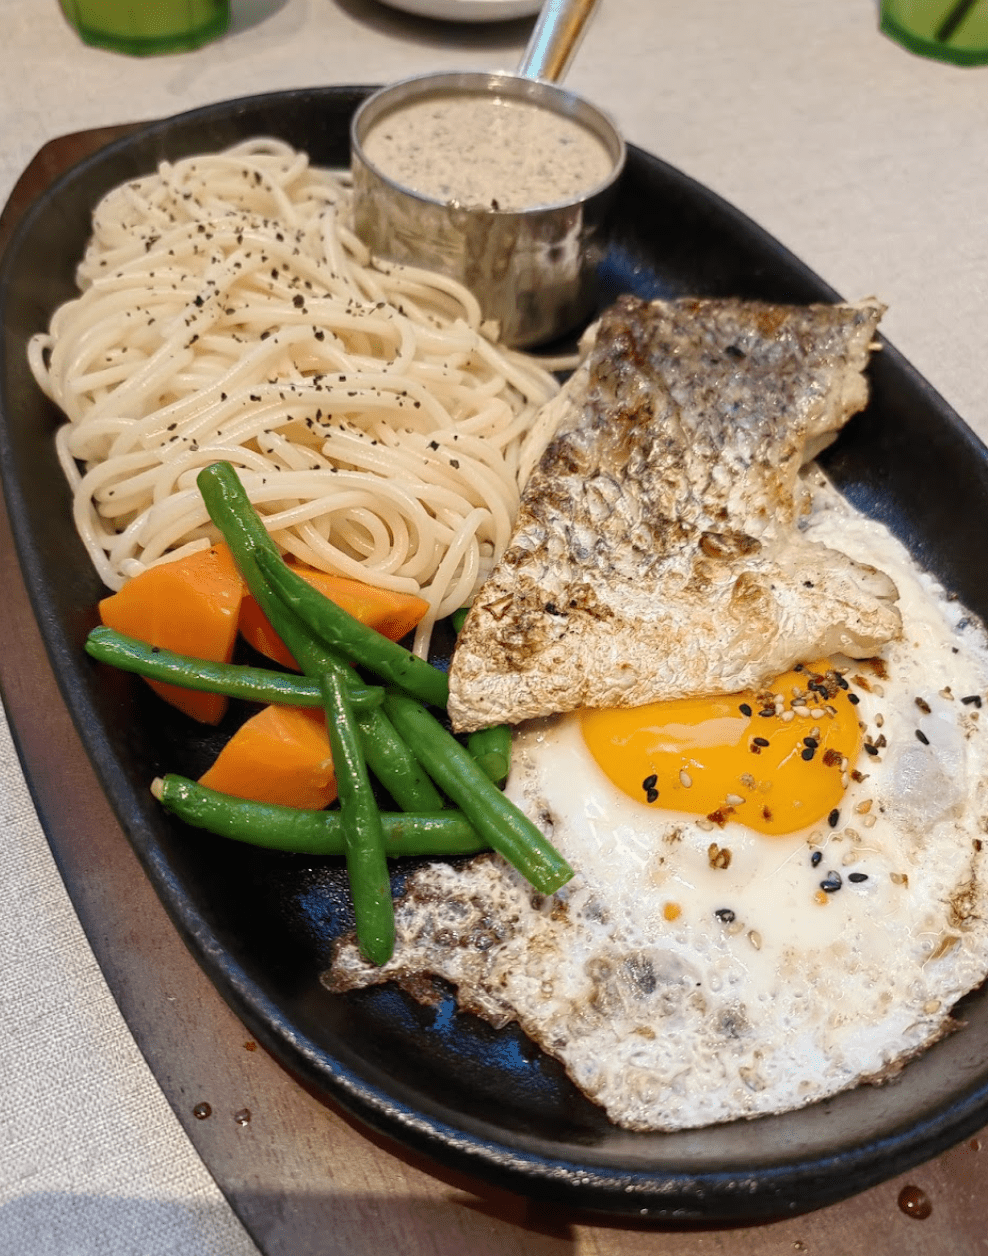 new cafes and restaurants in singapore - Gyo Gyo